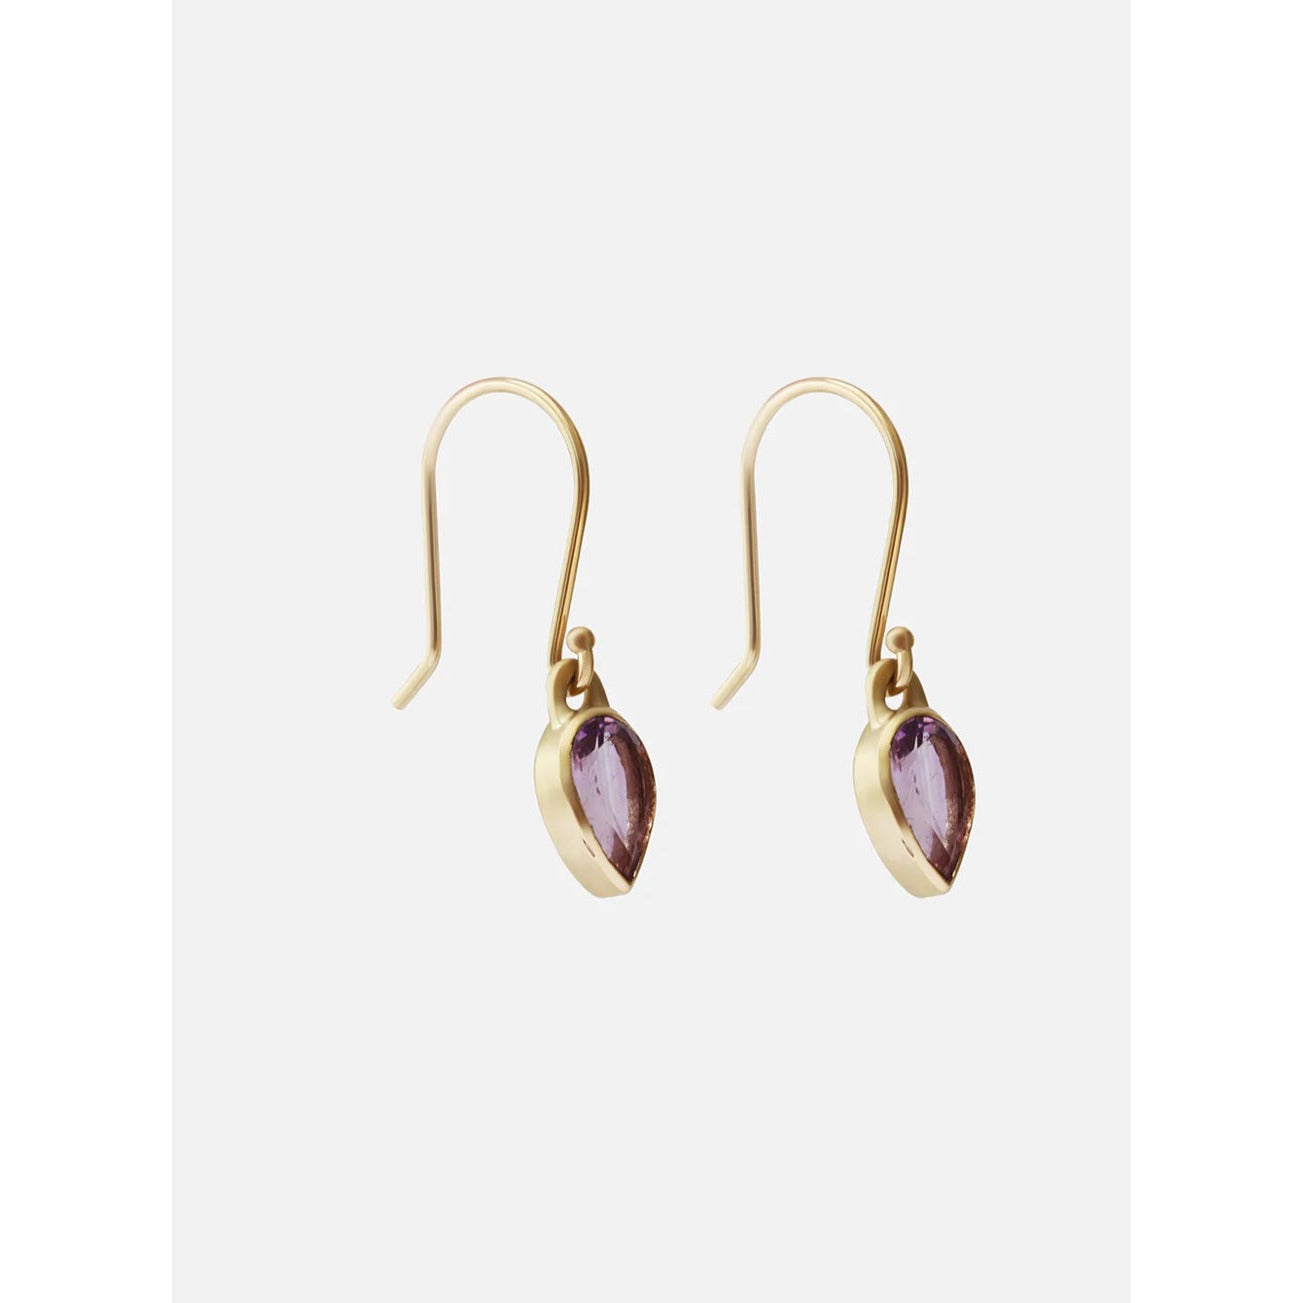 Details.  Indulge in the timeless elegance of these single amethyst earrings. The stunning amethyst stones are beautifully showcased in an elegant and sophisticated design. Elevate any outfit with these exquisite earrings - a must-have addition to your jewelry collection. Tear shaped Amethysts Stone  HxW: 20.79mm x 5.44mm 14k Yellow Gold Each earring measures 6.83mm  x 4.69mm